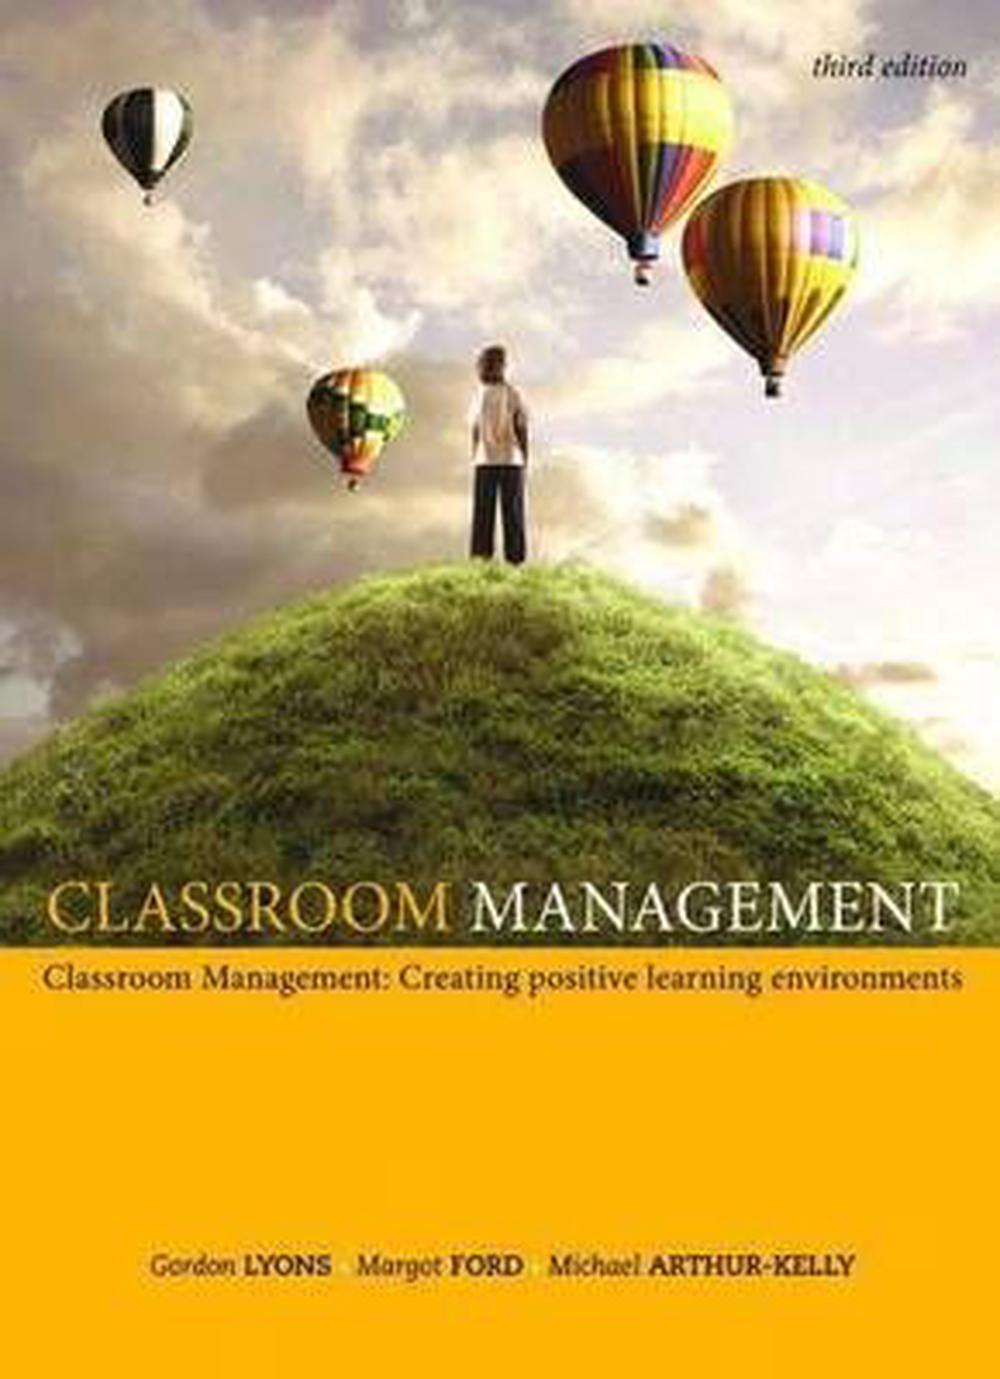 Classroom Management by Gordon Lyons, Paperback, 9780170187121 | Buy online at The Nile